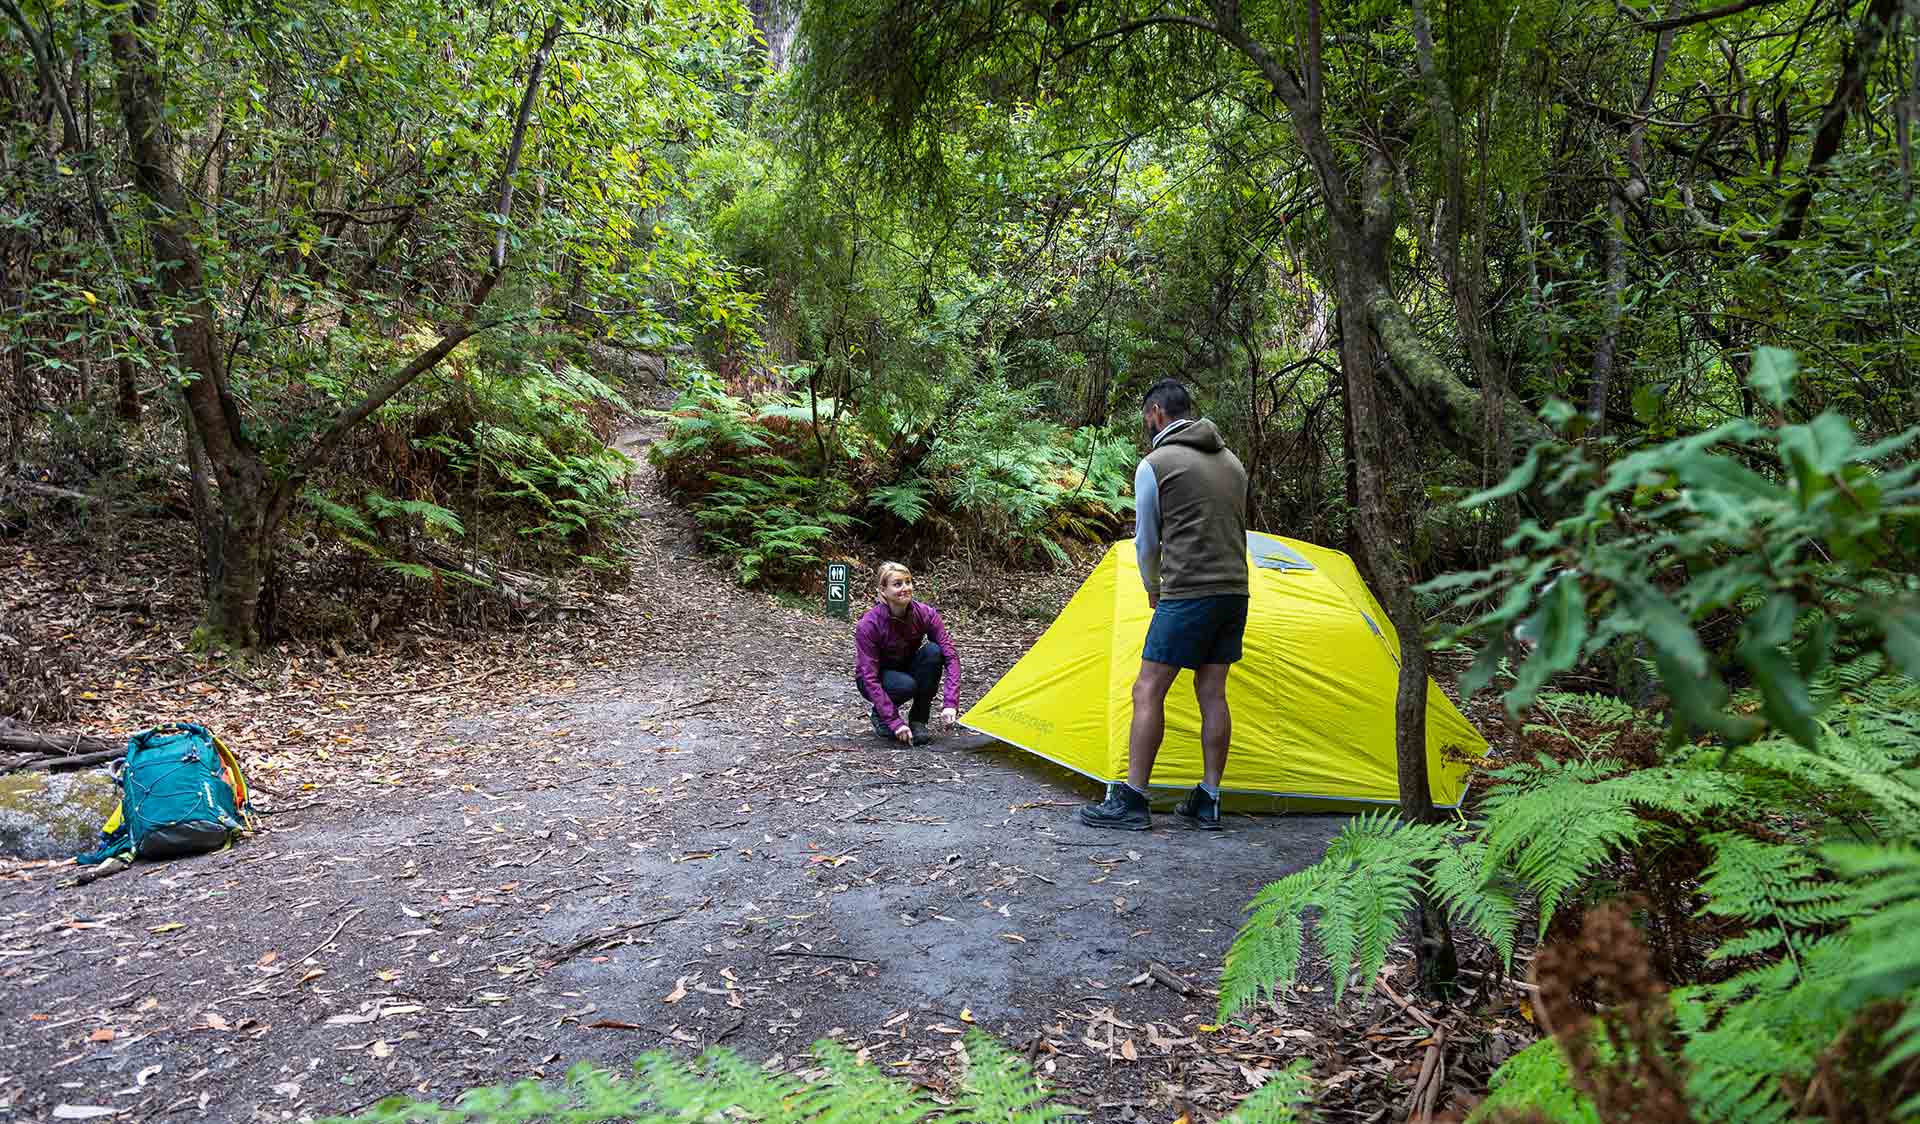 A man and women set up a yellow tent at Roaring Meg on the Southern Circuit hiking trail at Wilsons Promontory National Park